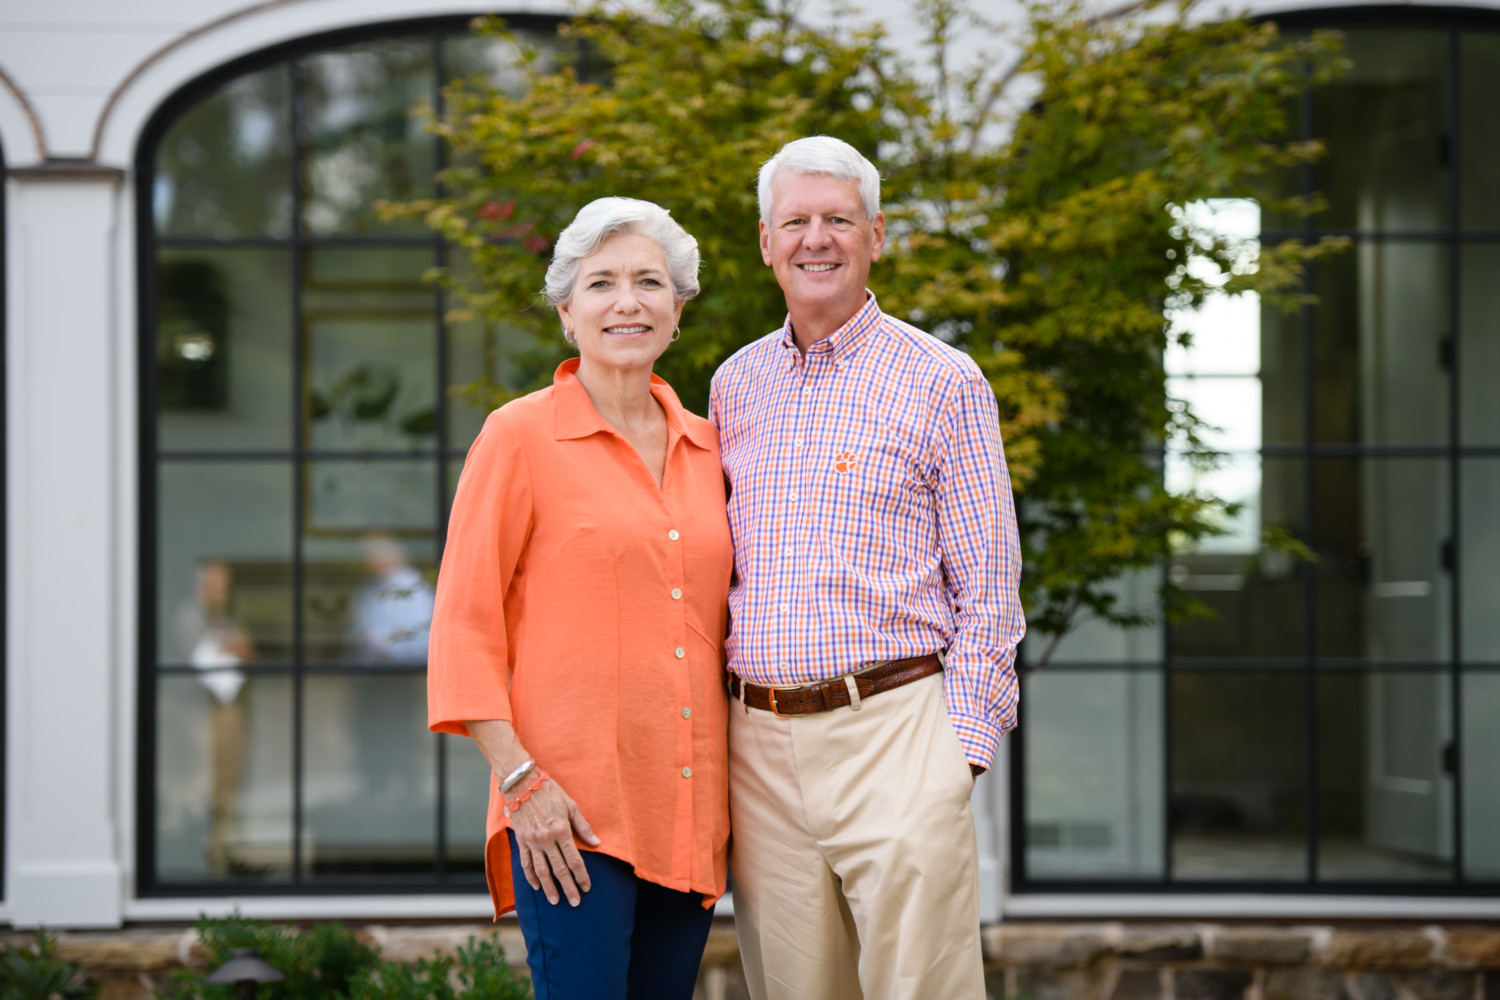 Ron and Jane Lindsay are donating $1 million to the College of Engineering, Computing and Applied Sciences, one of many ways they give back to the community.